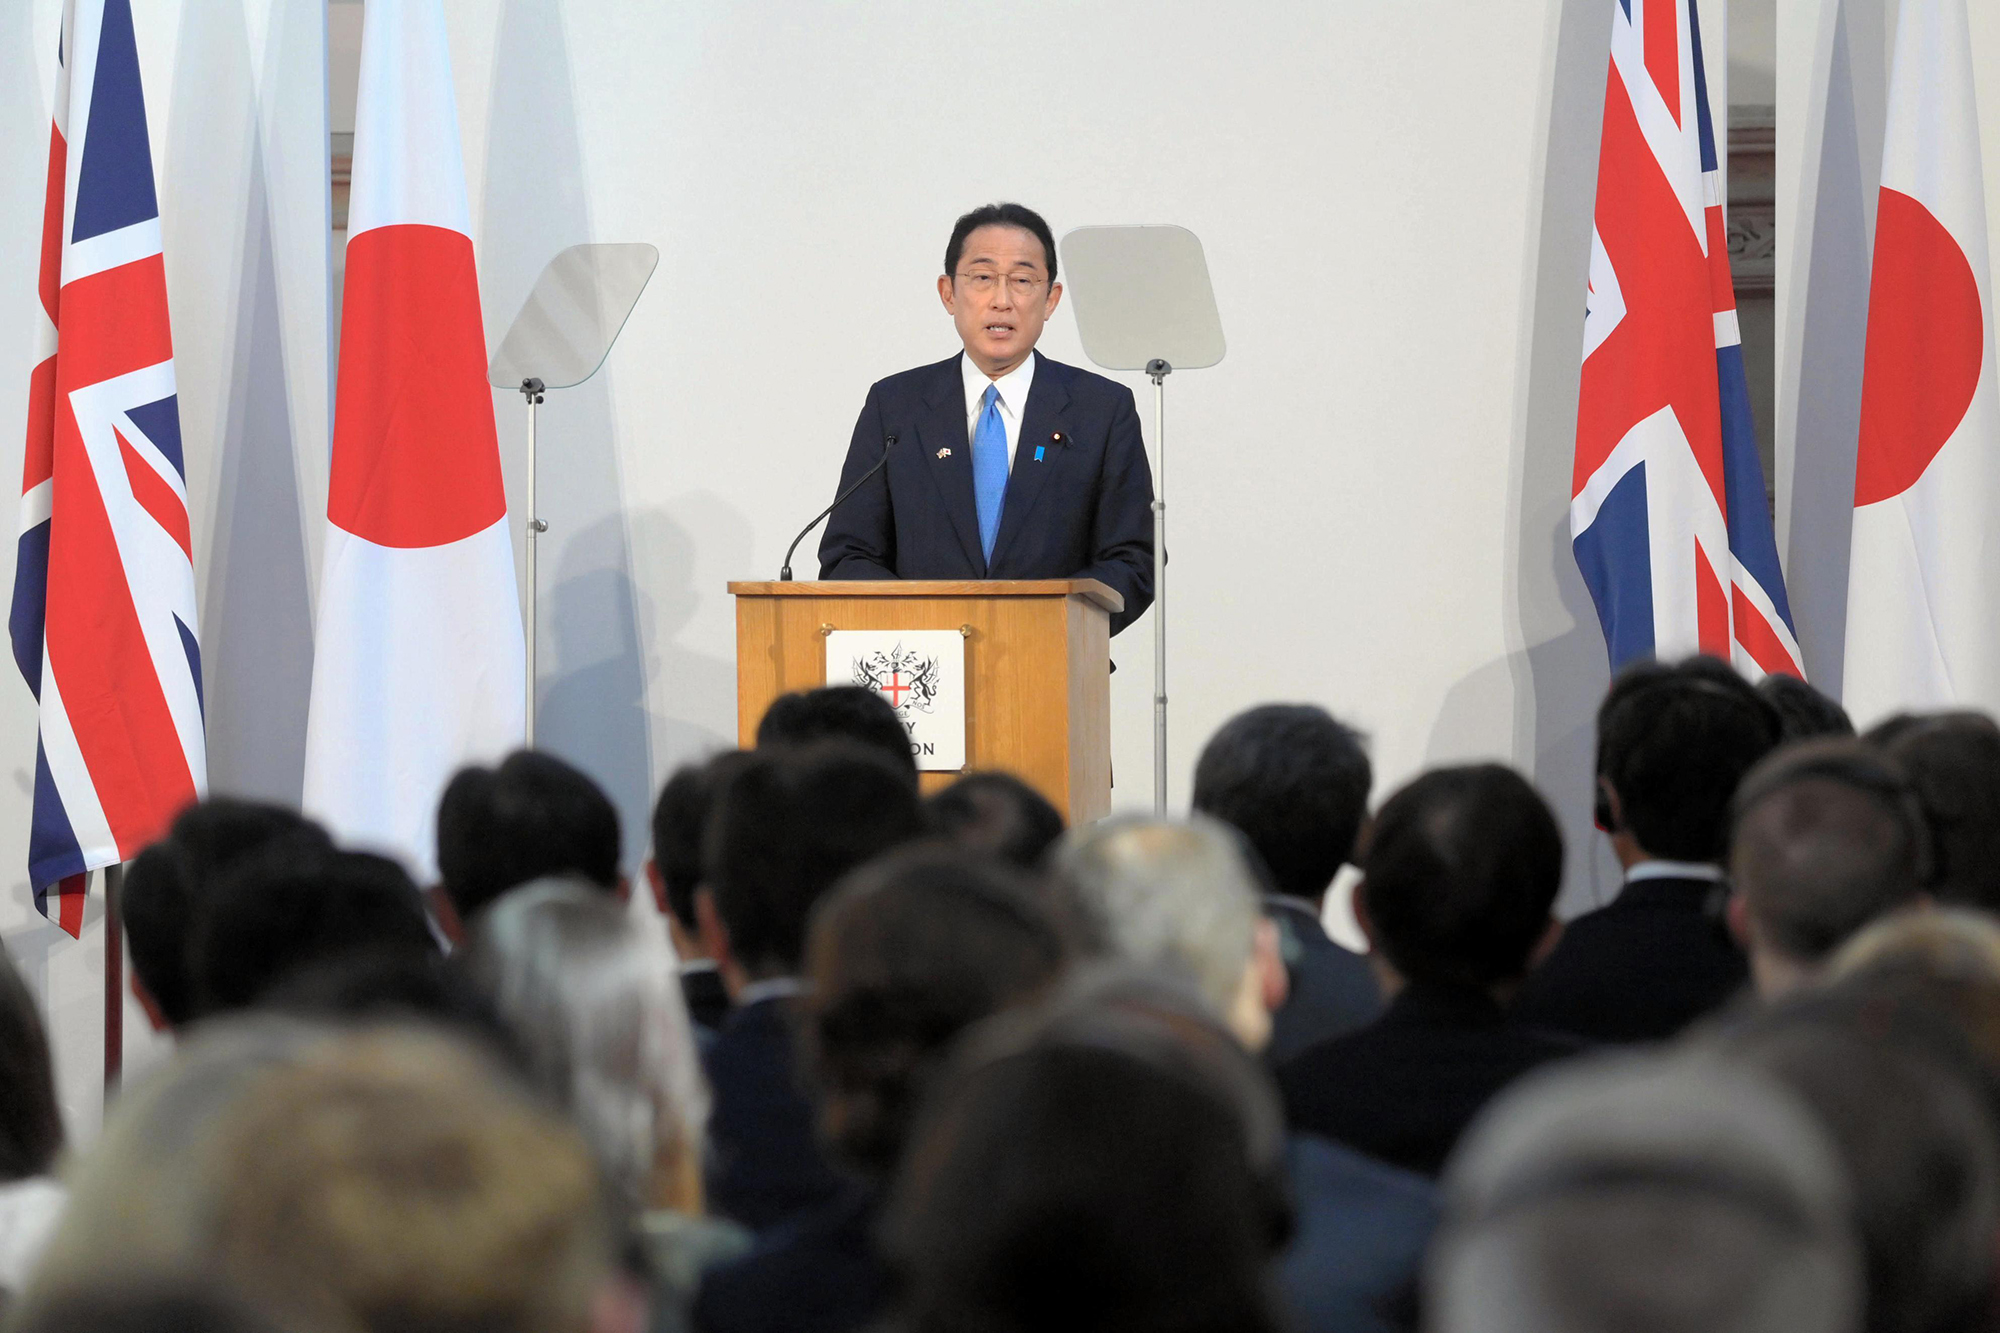 Japanese Prime Minister Fumio Kishida gives a speech in the City of London financial district on May 5.